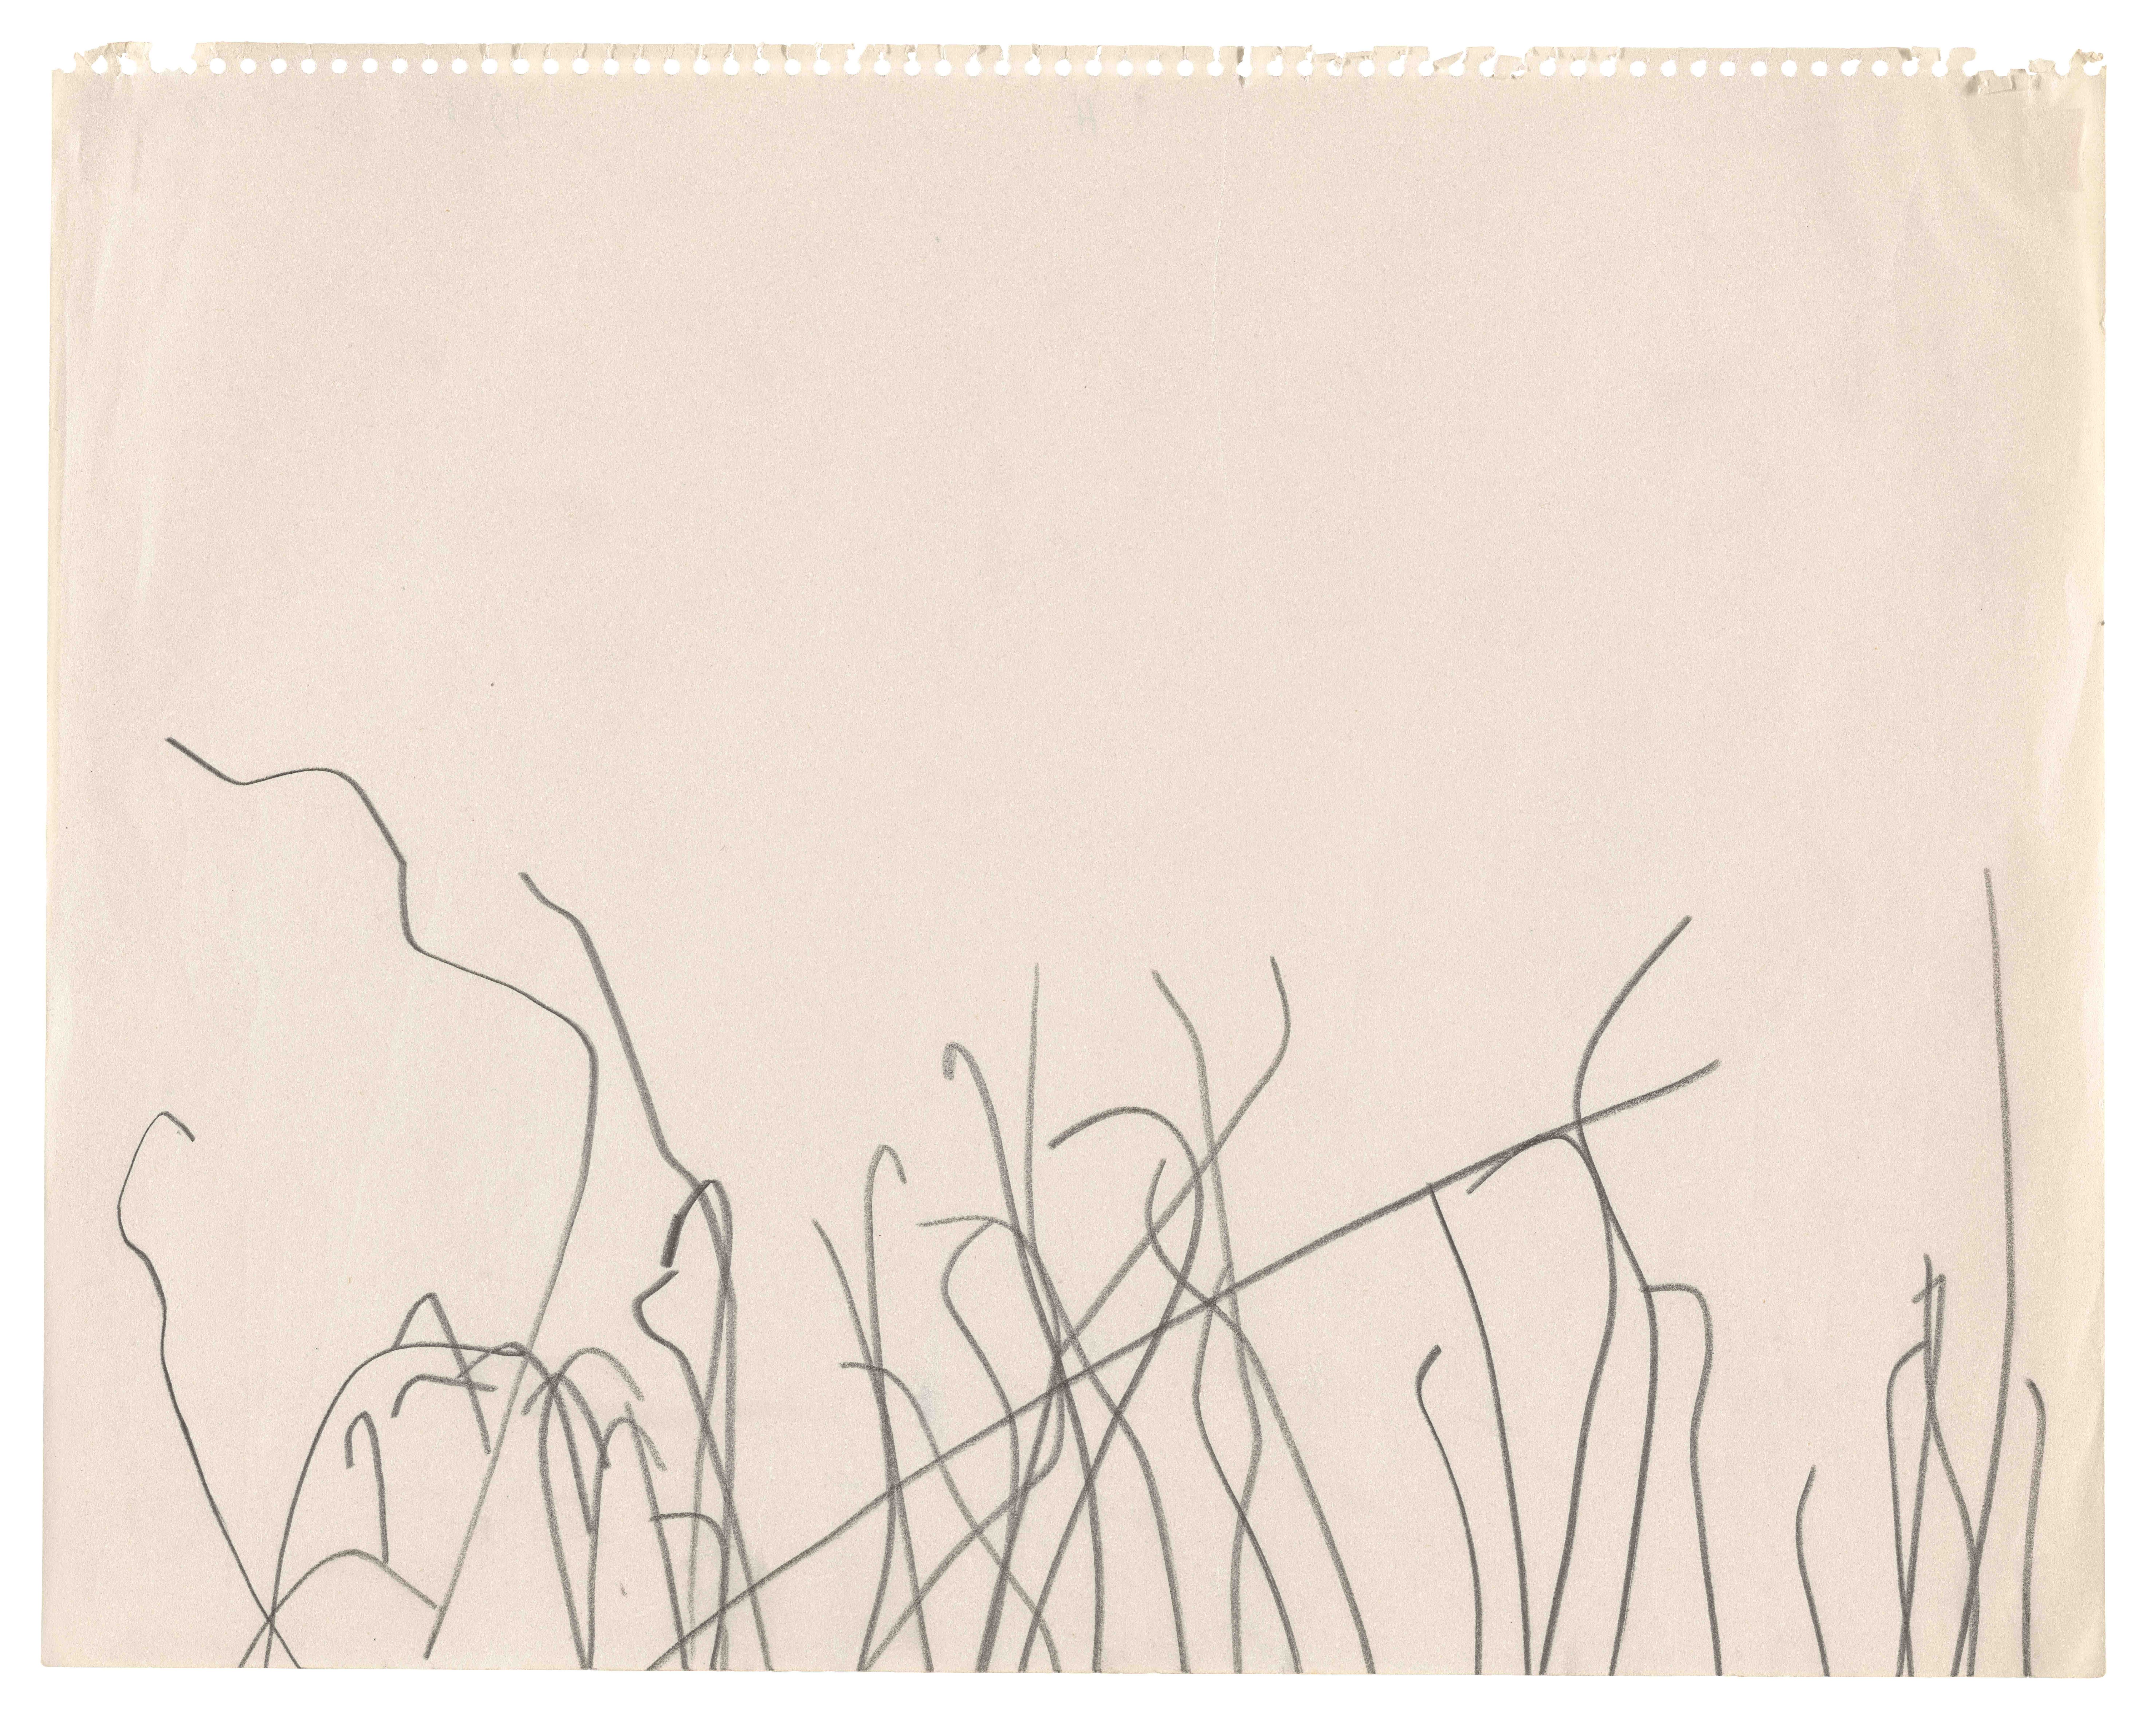 Ellsworth Kelly: Reflections on Water and Other Early Drawings